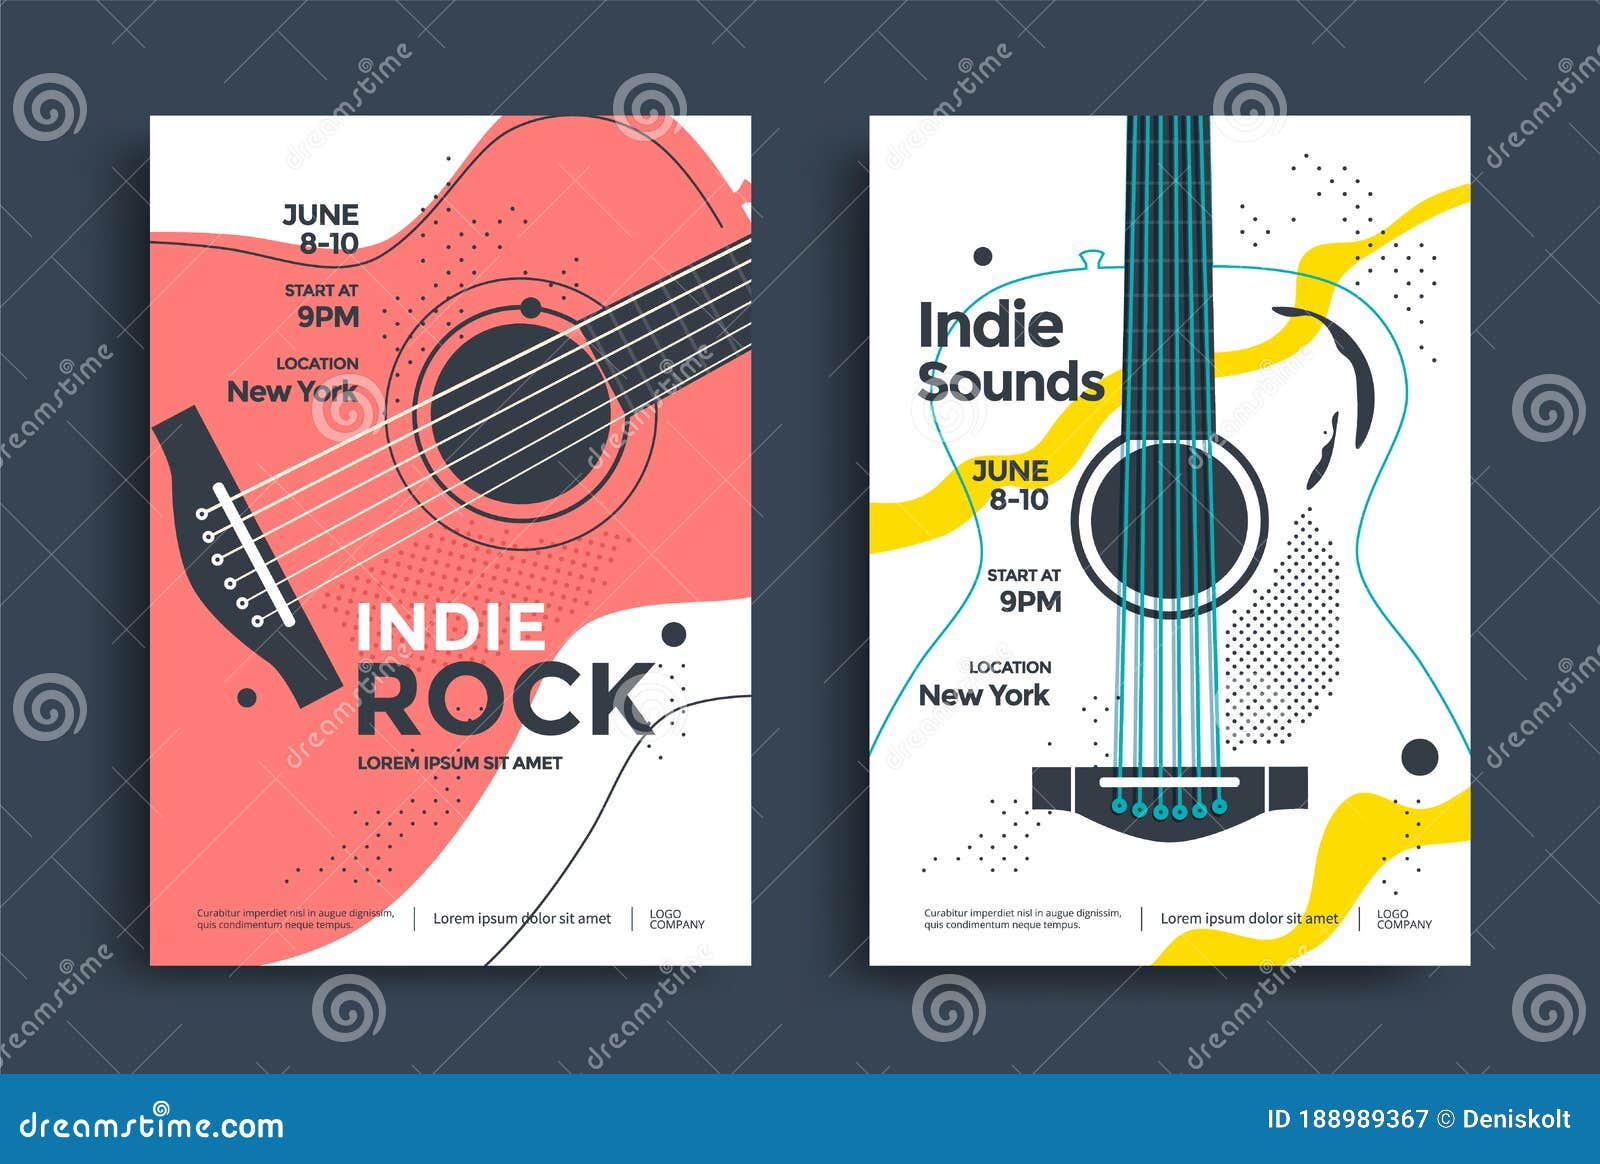 indie rock poster flyer template